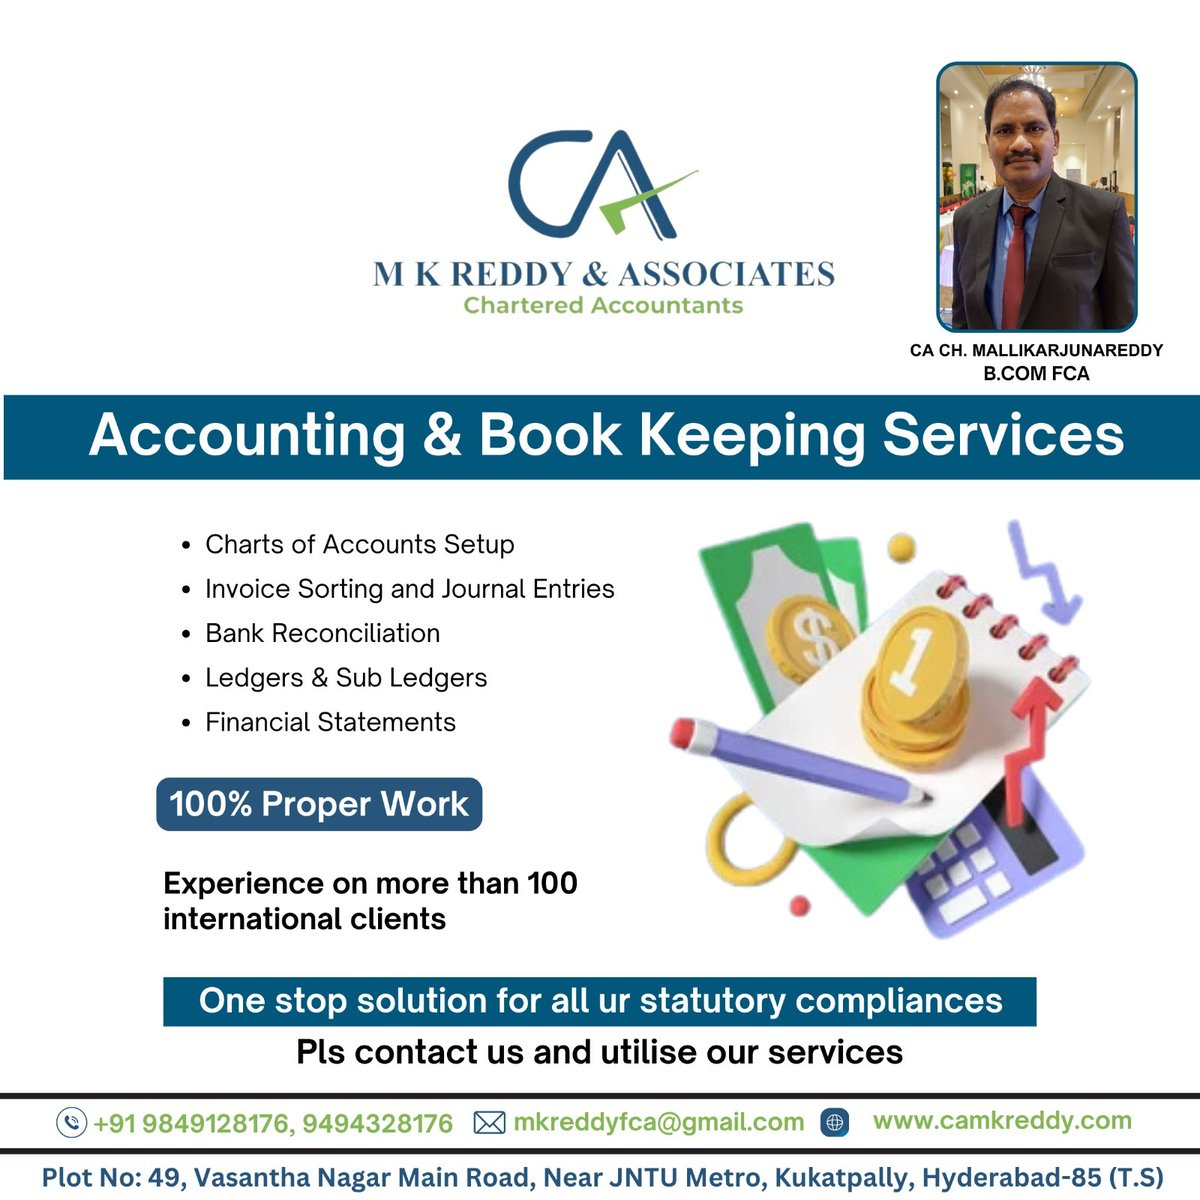 🌟 Are you tired of juggling numbers and struggling with complex financial tasks? Look no further! 

#AccountingServices #BookkeepingExperts #StatutoryCompliance #CAMKReddyAssociates #mkreddyassociates #caassociates #tally #droupadimurn #economicdevelopment #financialreporting